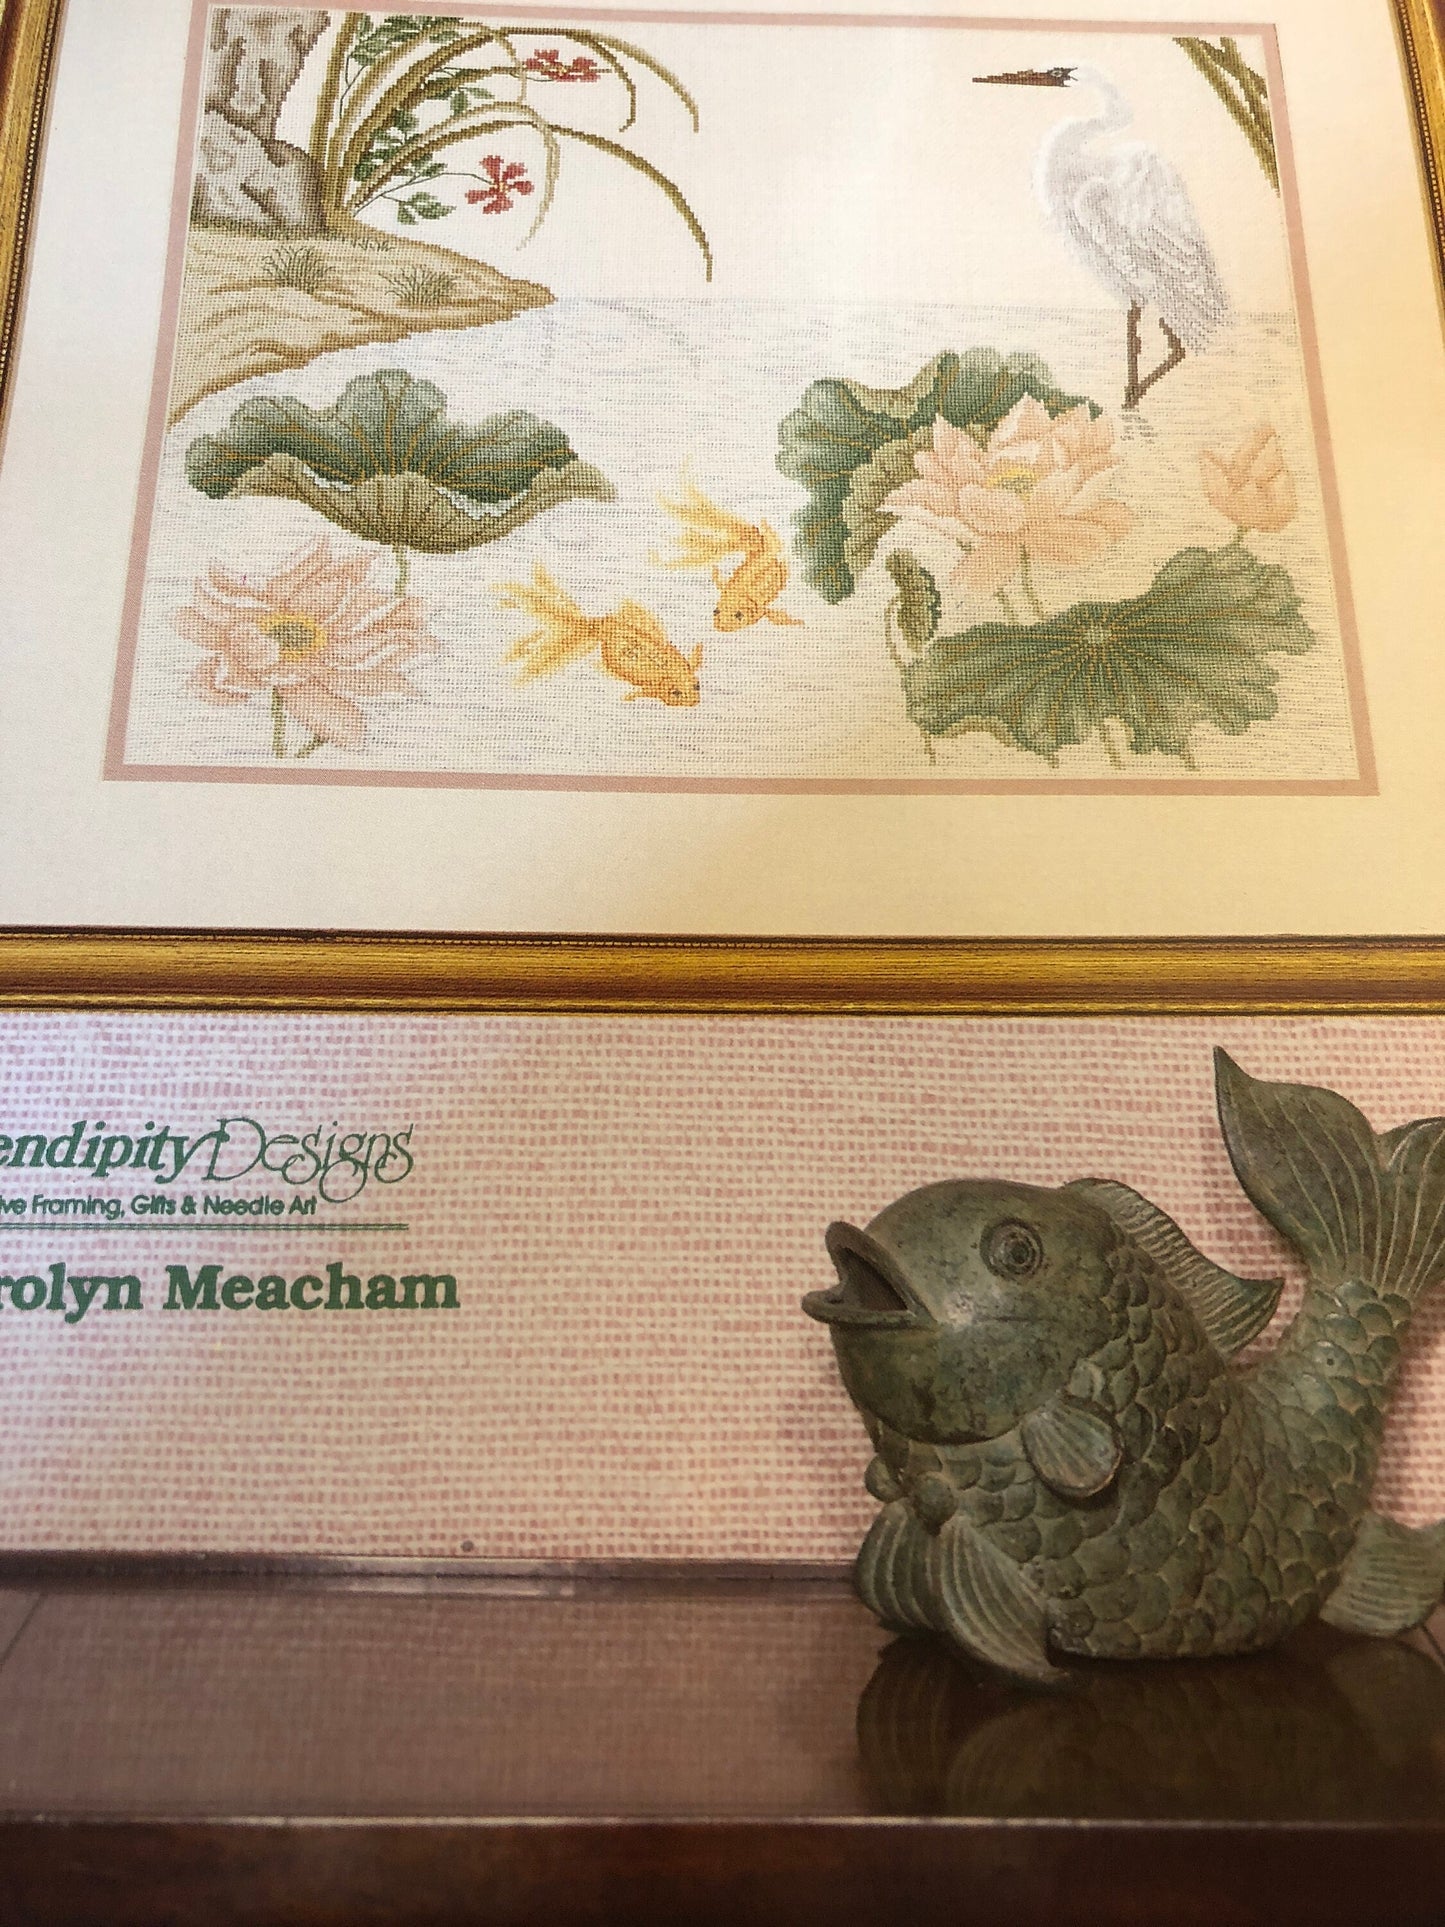 Serendipity Designs, Set of 3 Charts, Harmony, Cherry Blossoms, Lotus Pond, Fragrant Camellas, Vintage 1991*